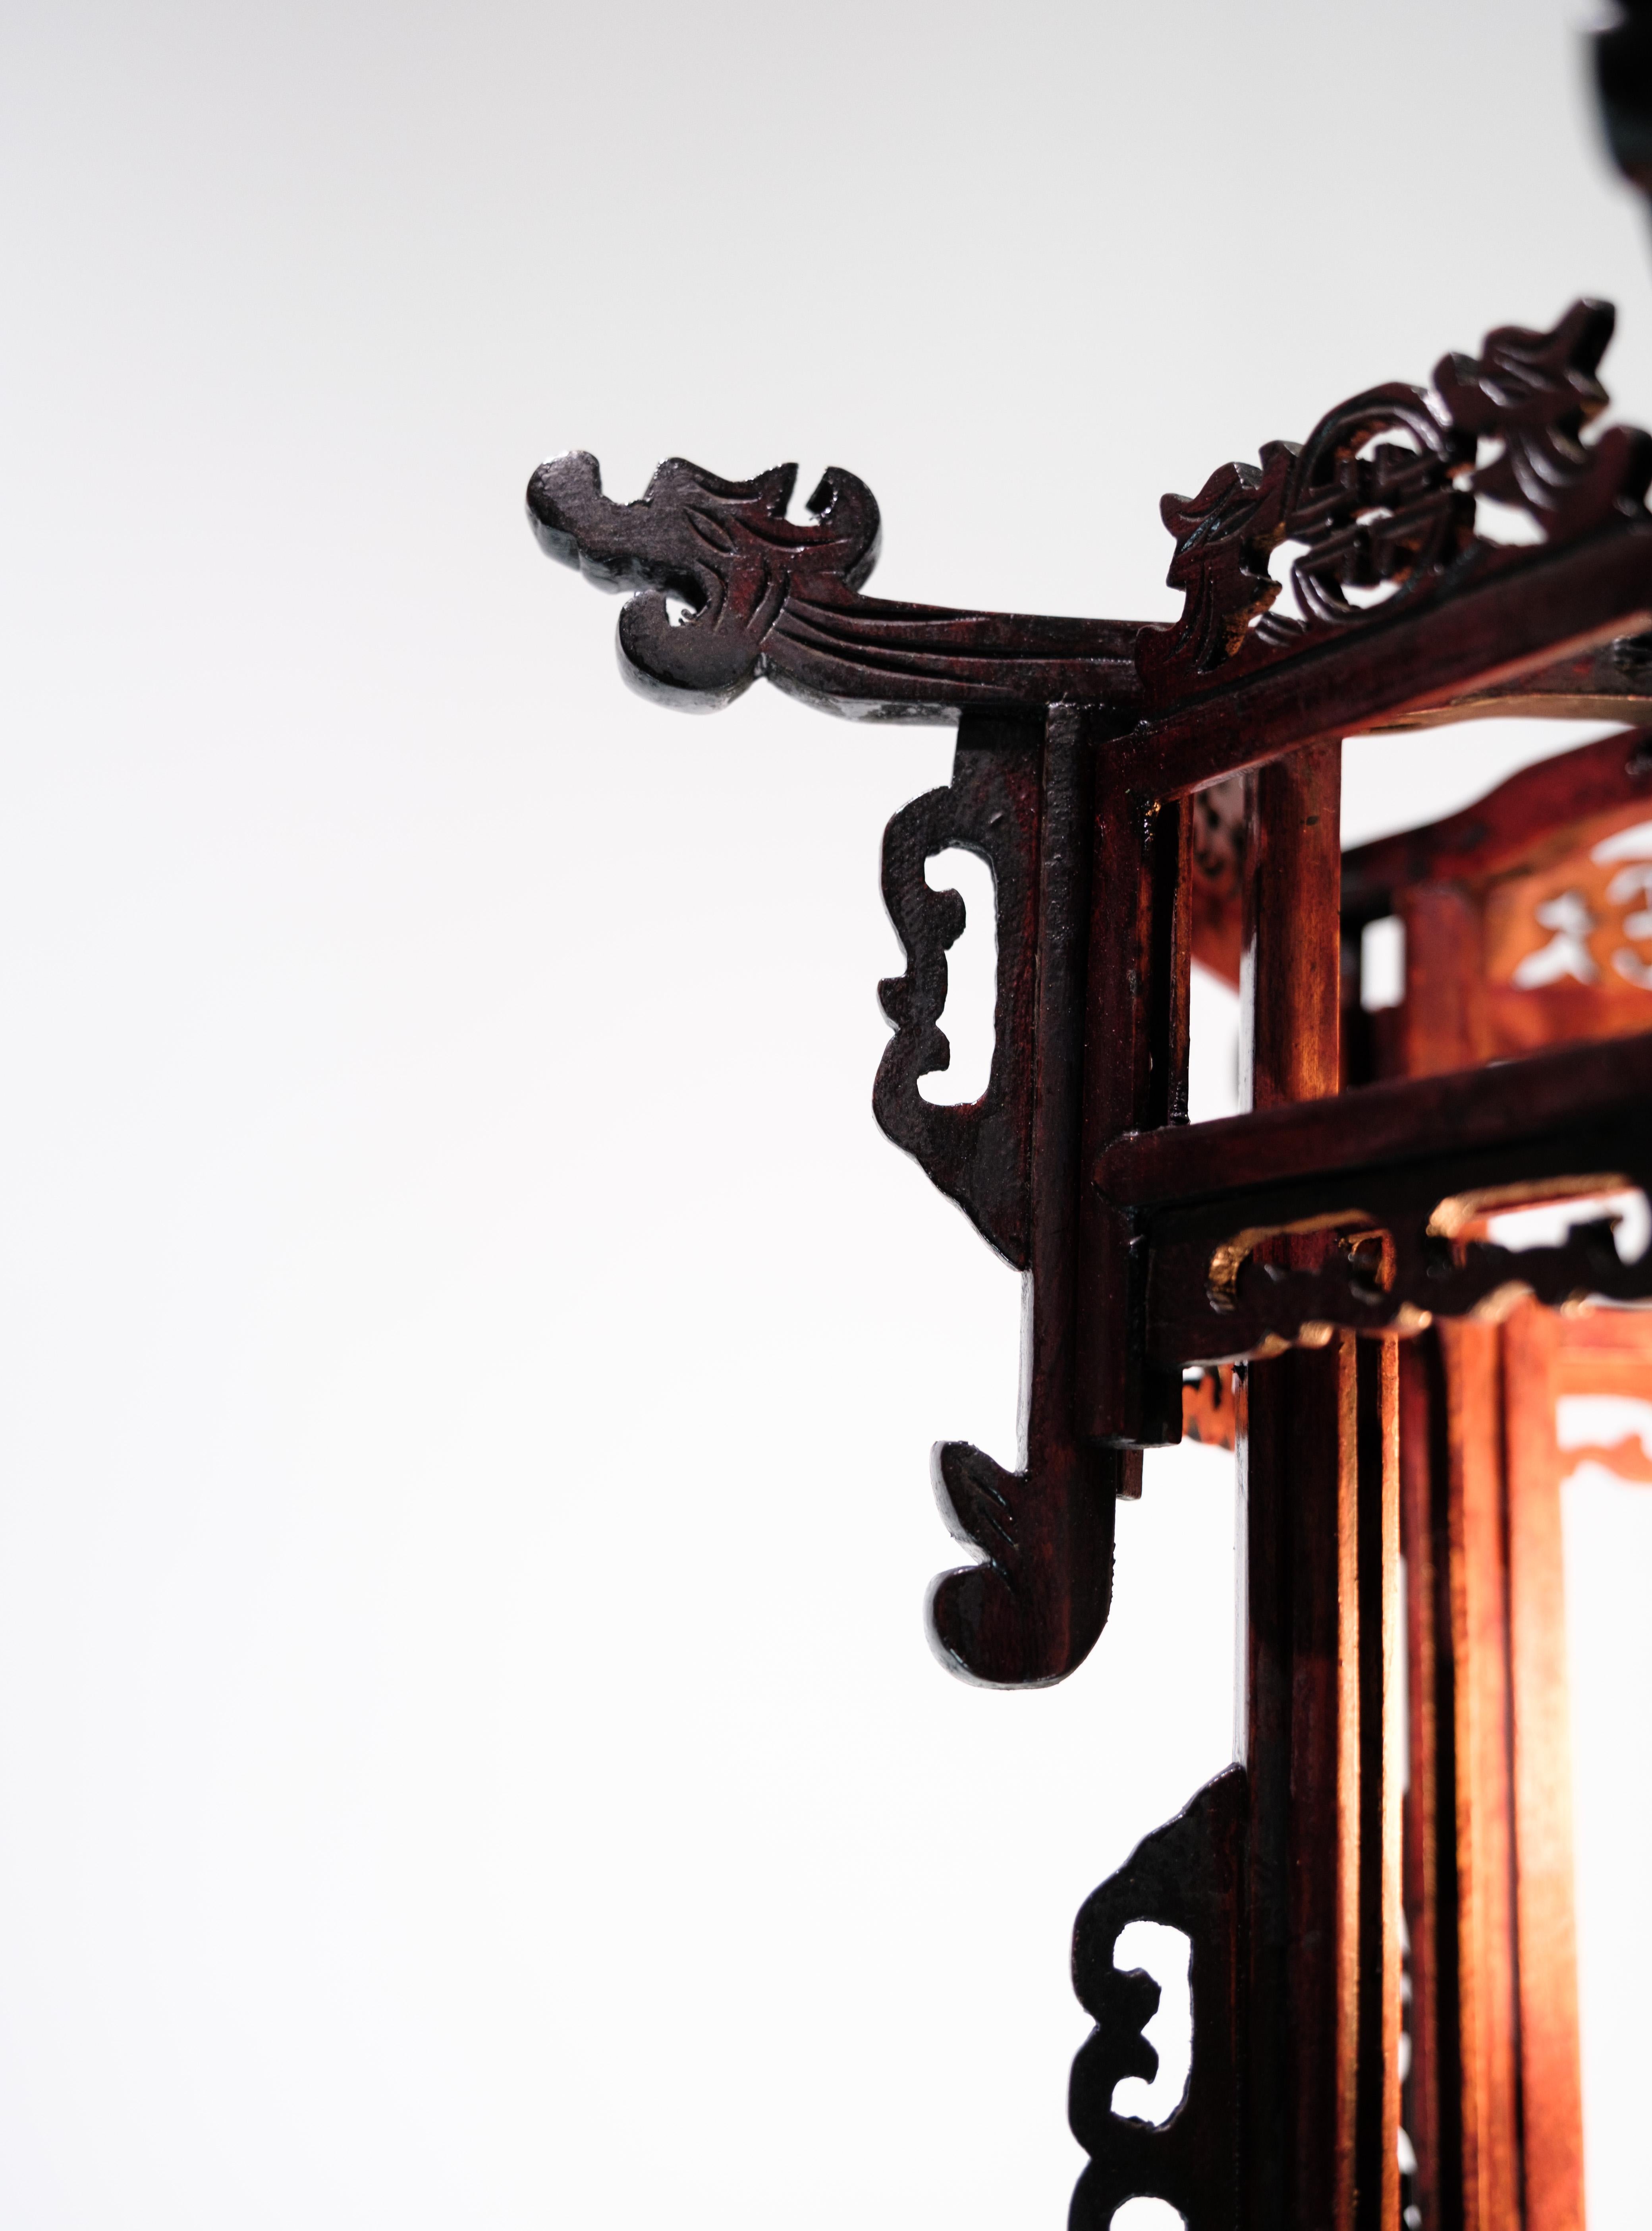 Ceiling lamp made of wood with Chinese-style decoration designed as a lantern from around the 1930s.
H: 25/60 Dia: 31